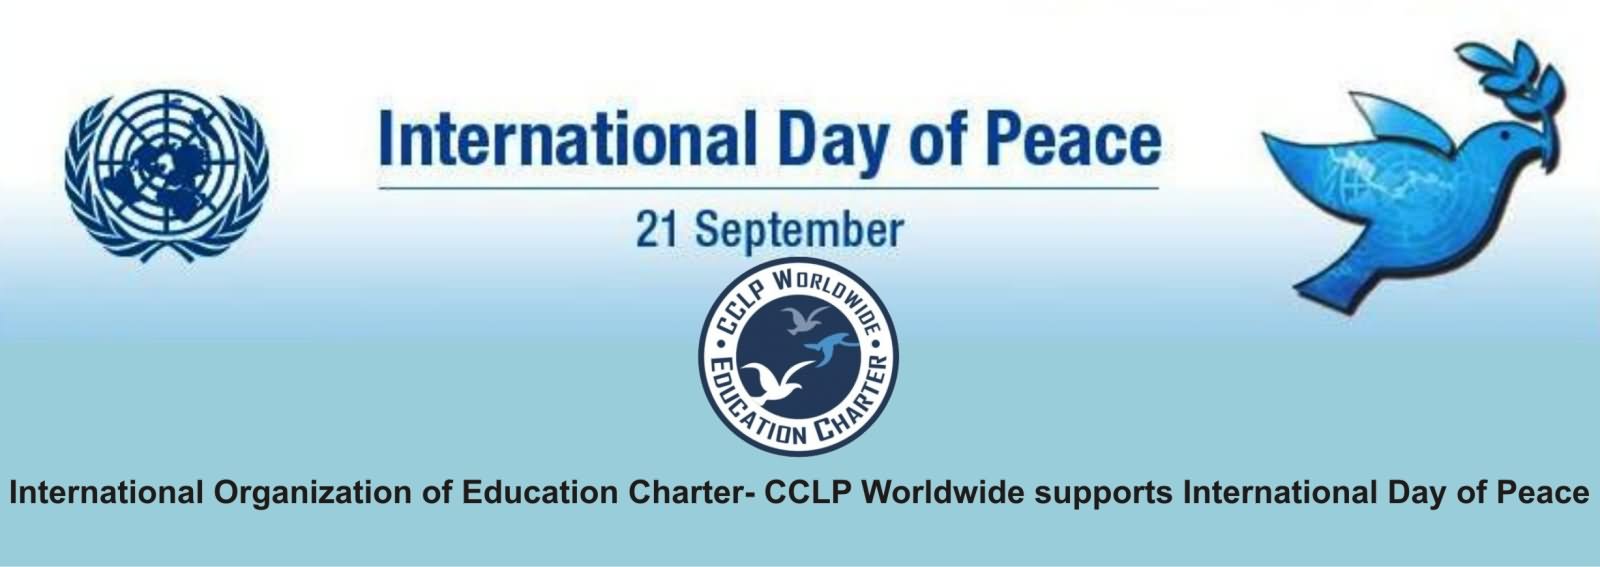 International Day of Peace 21 September Picture